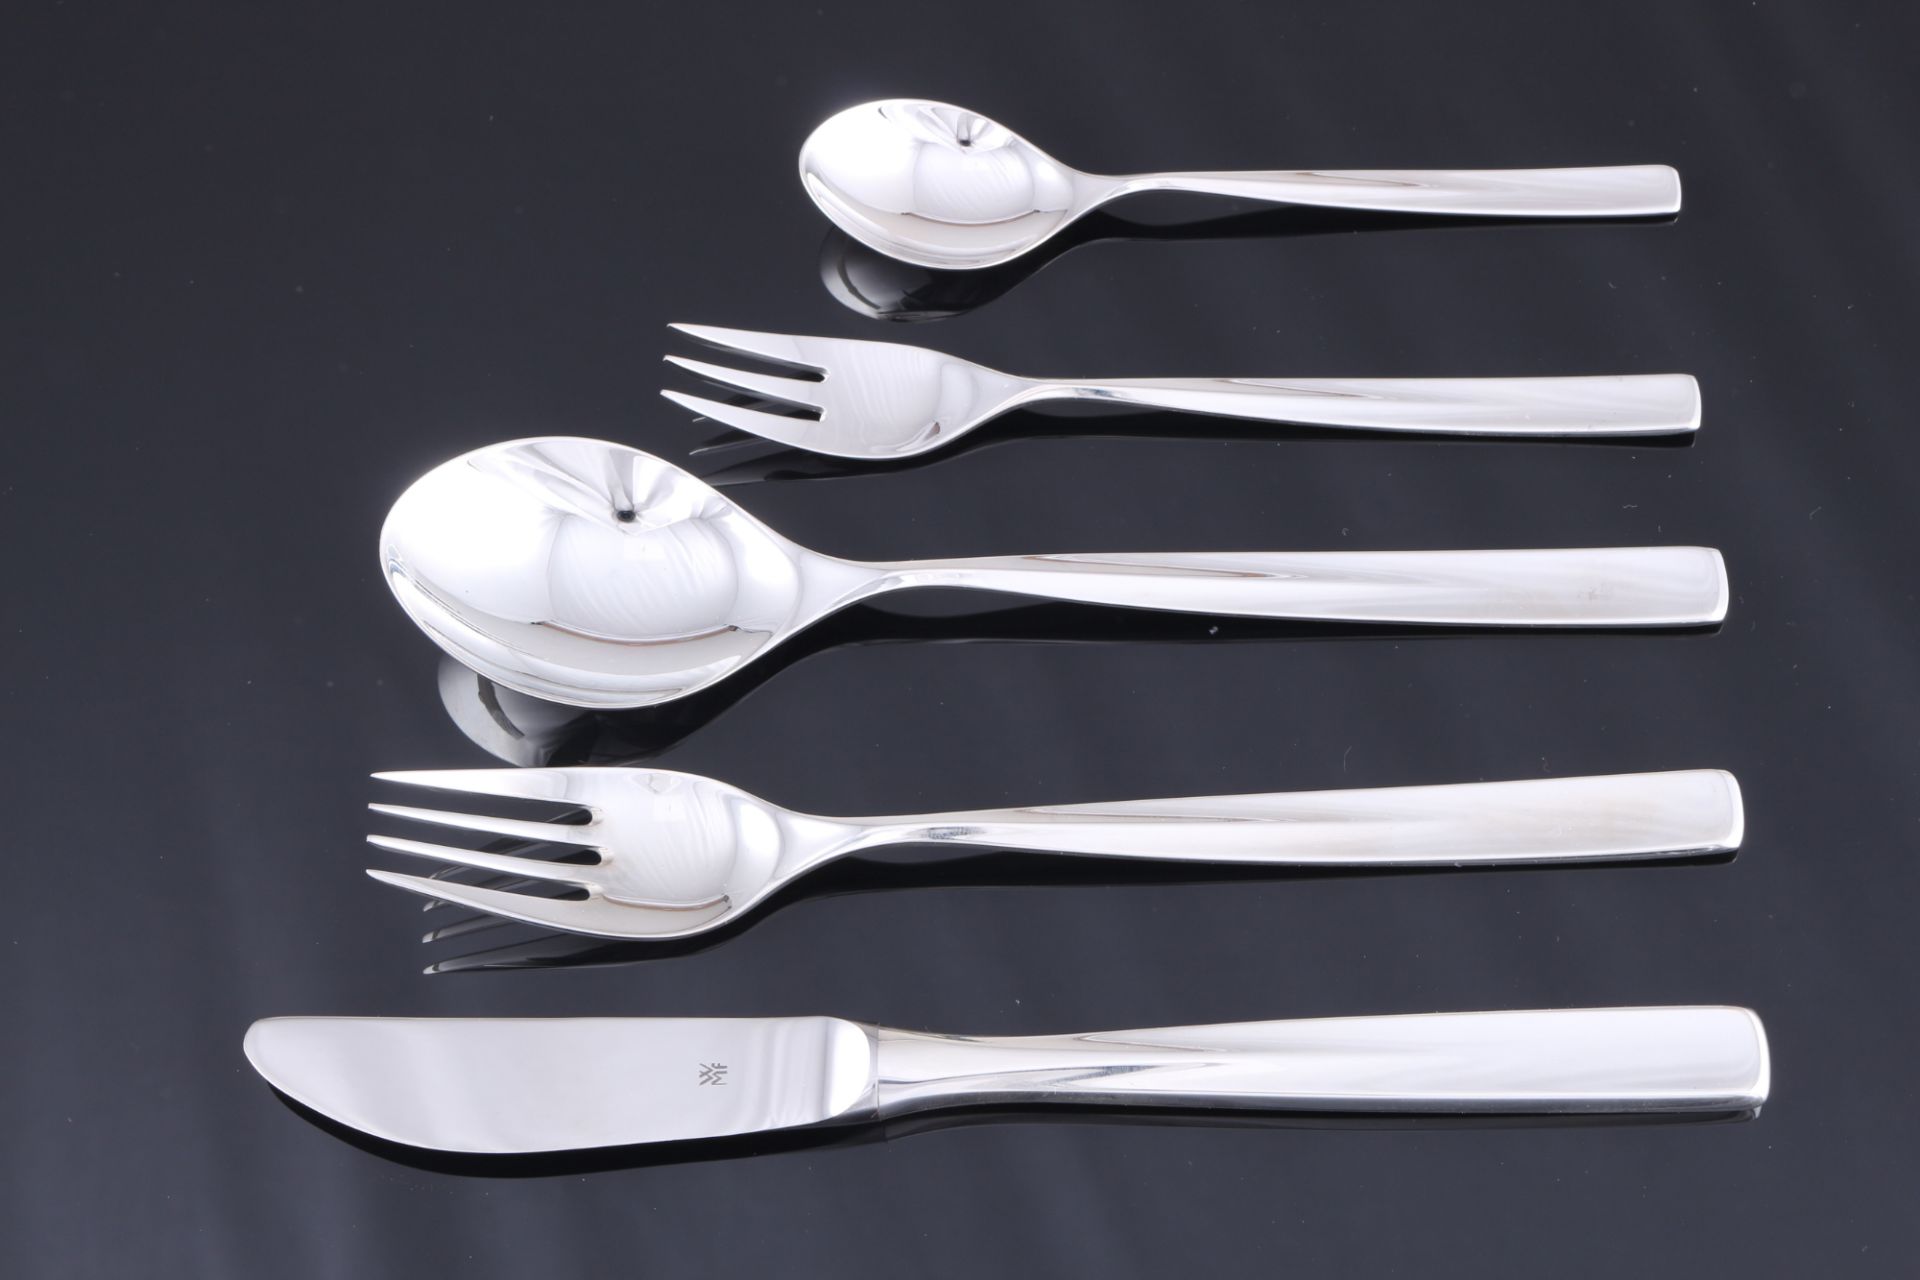 WMF Amsterdam 800 Silber Besteck, silver cutlery, - Image 2 of 5